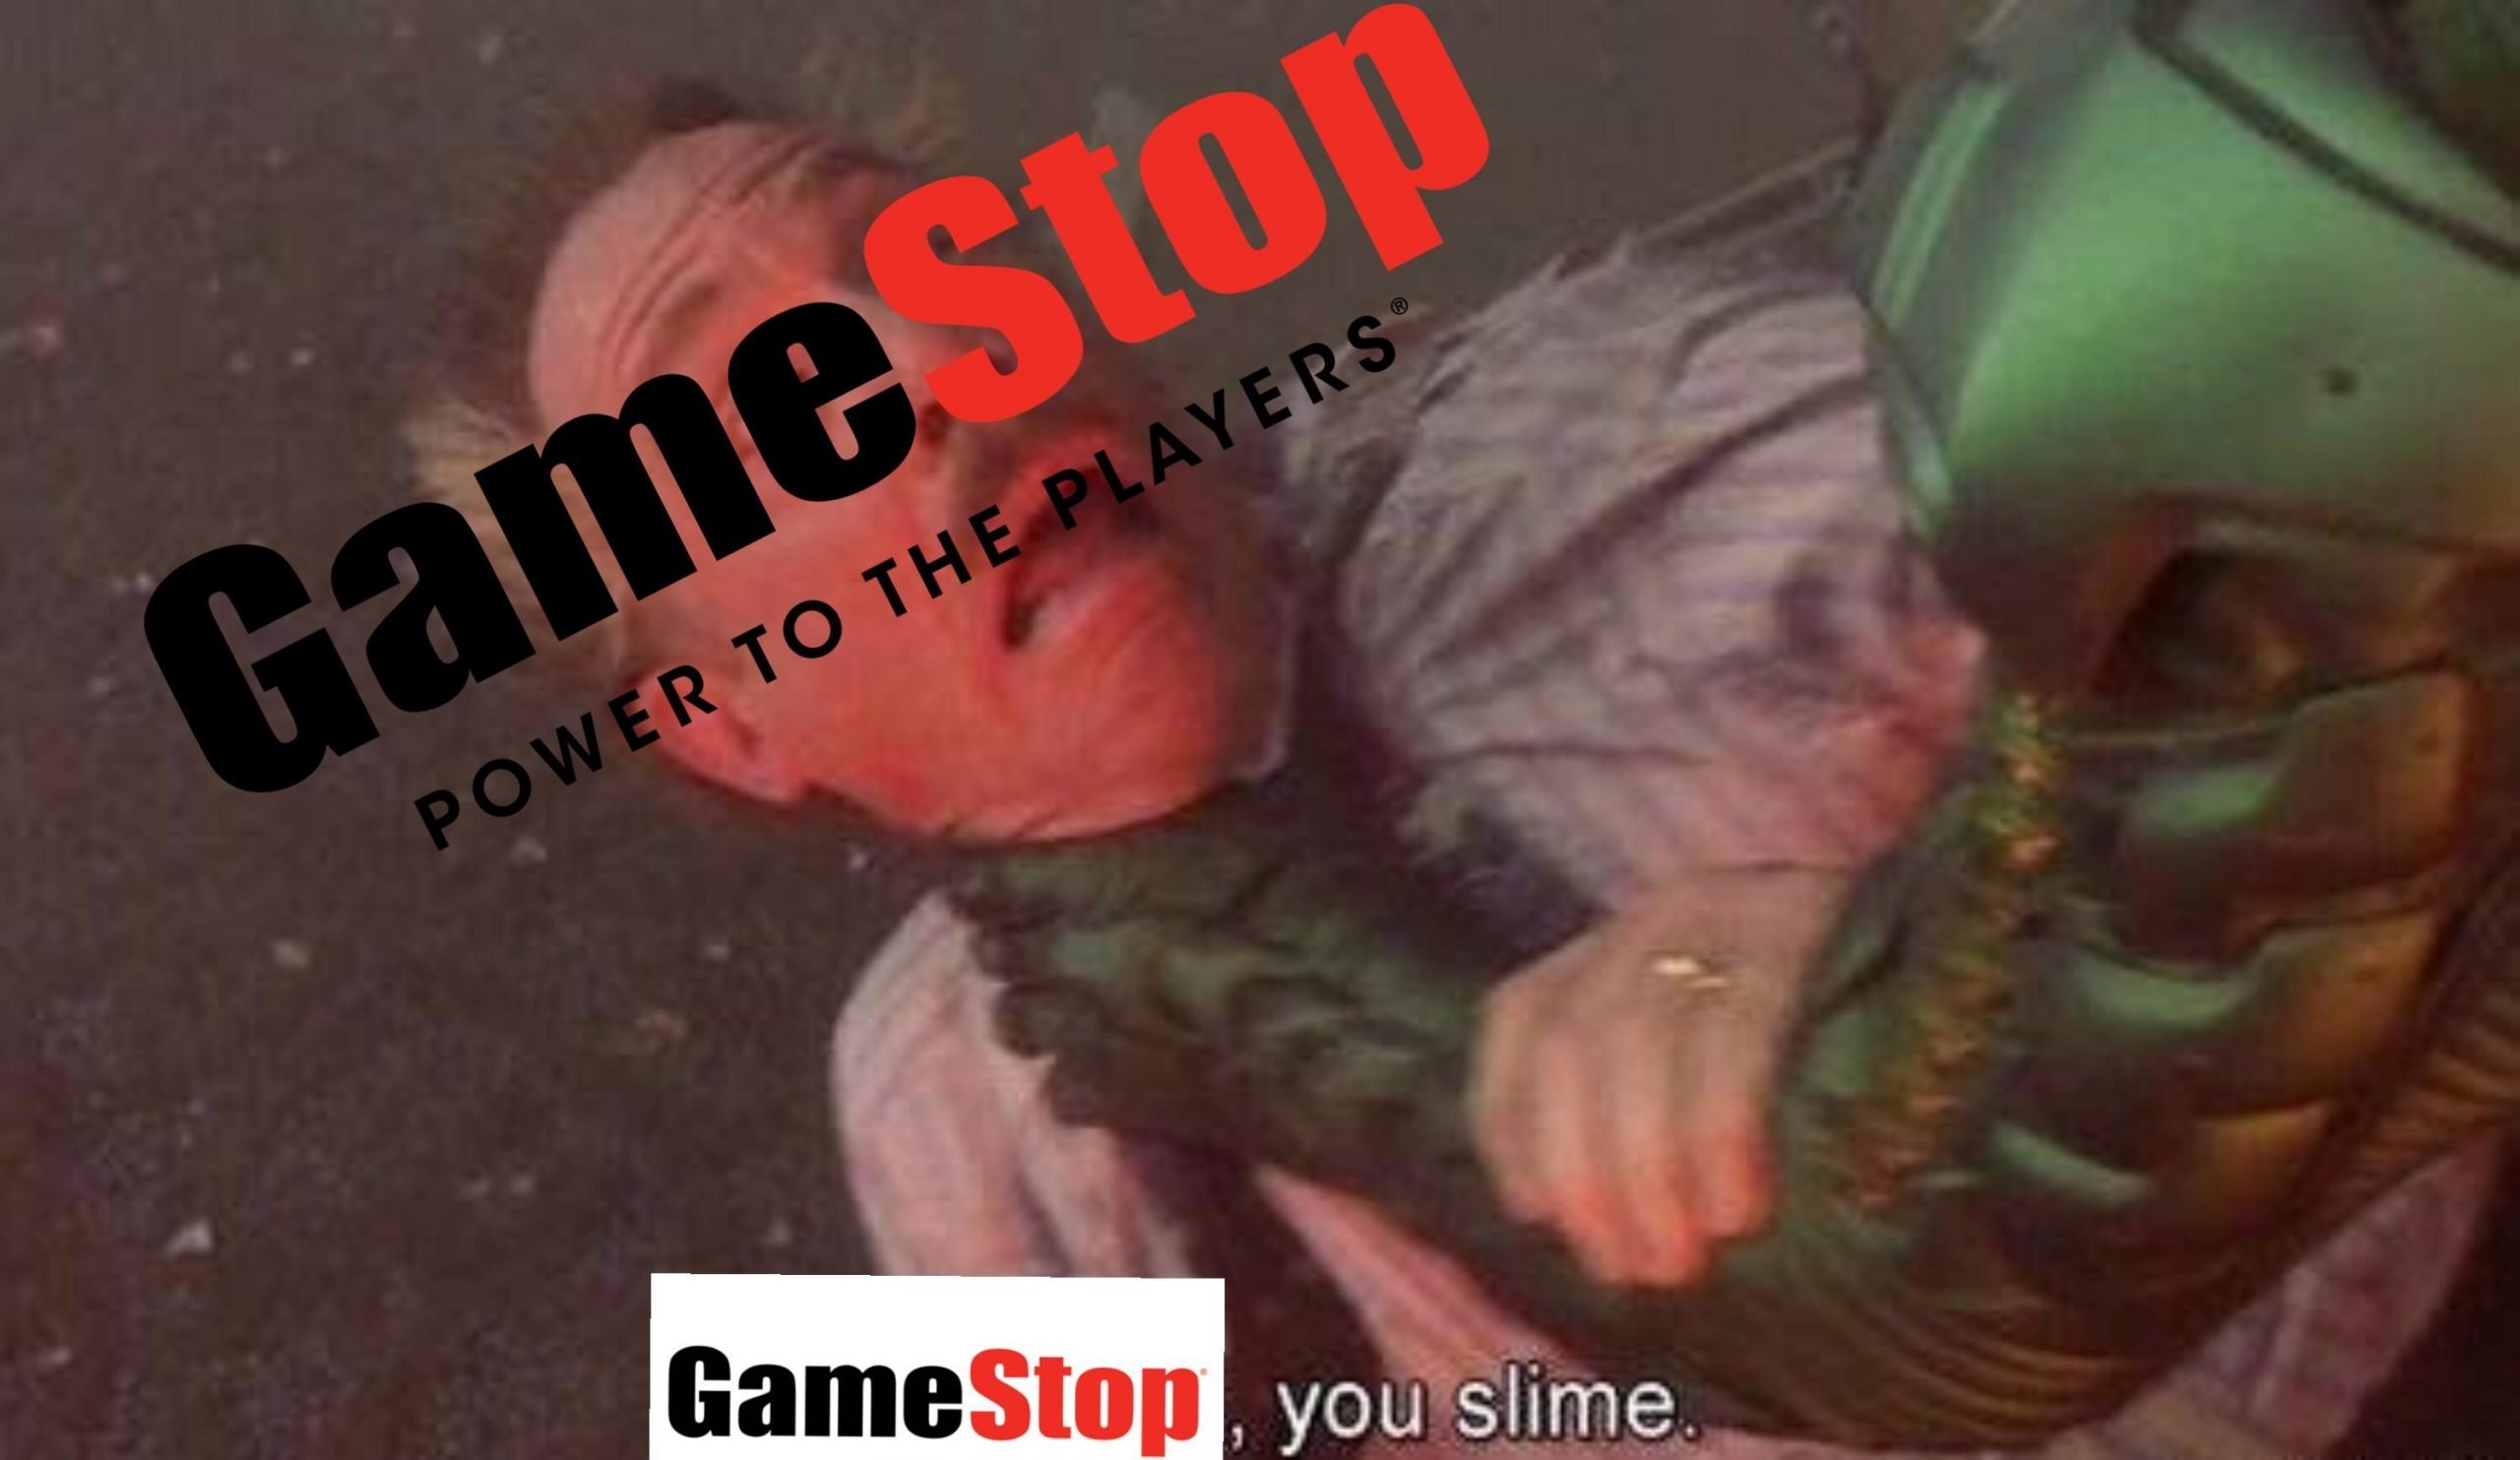 When GameStop sends an email telling me that my Limited Ed ...